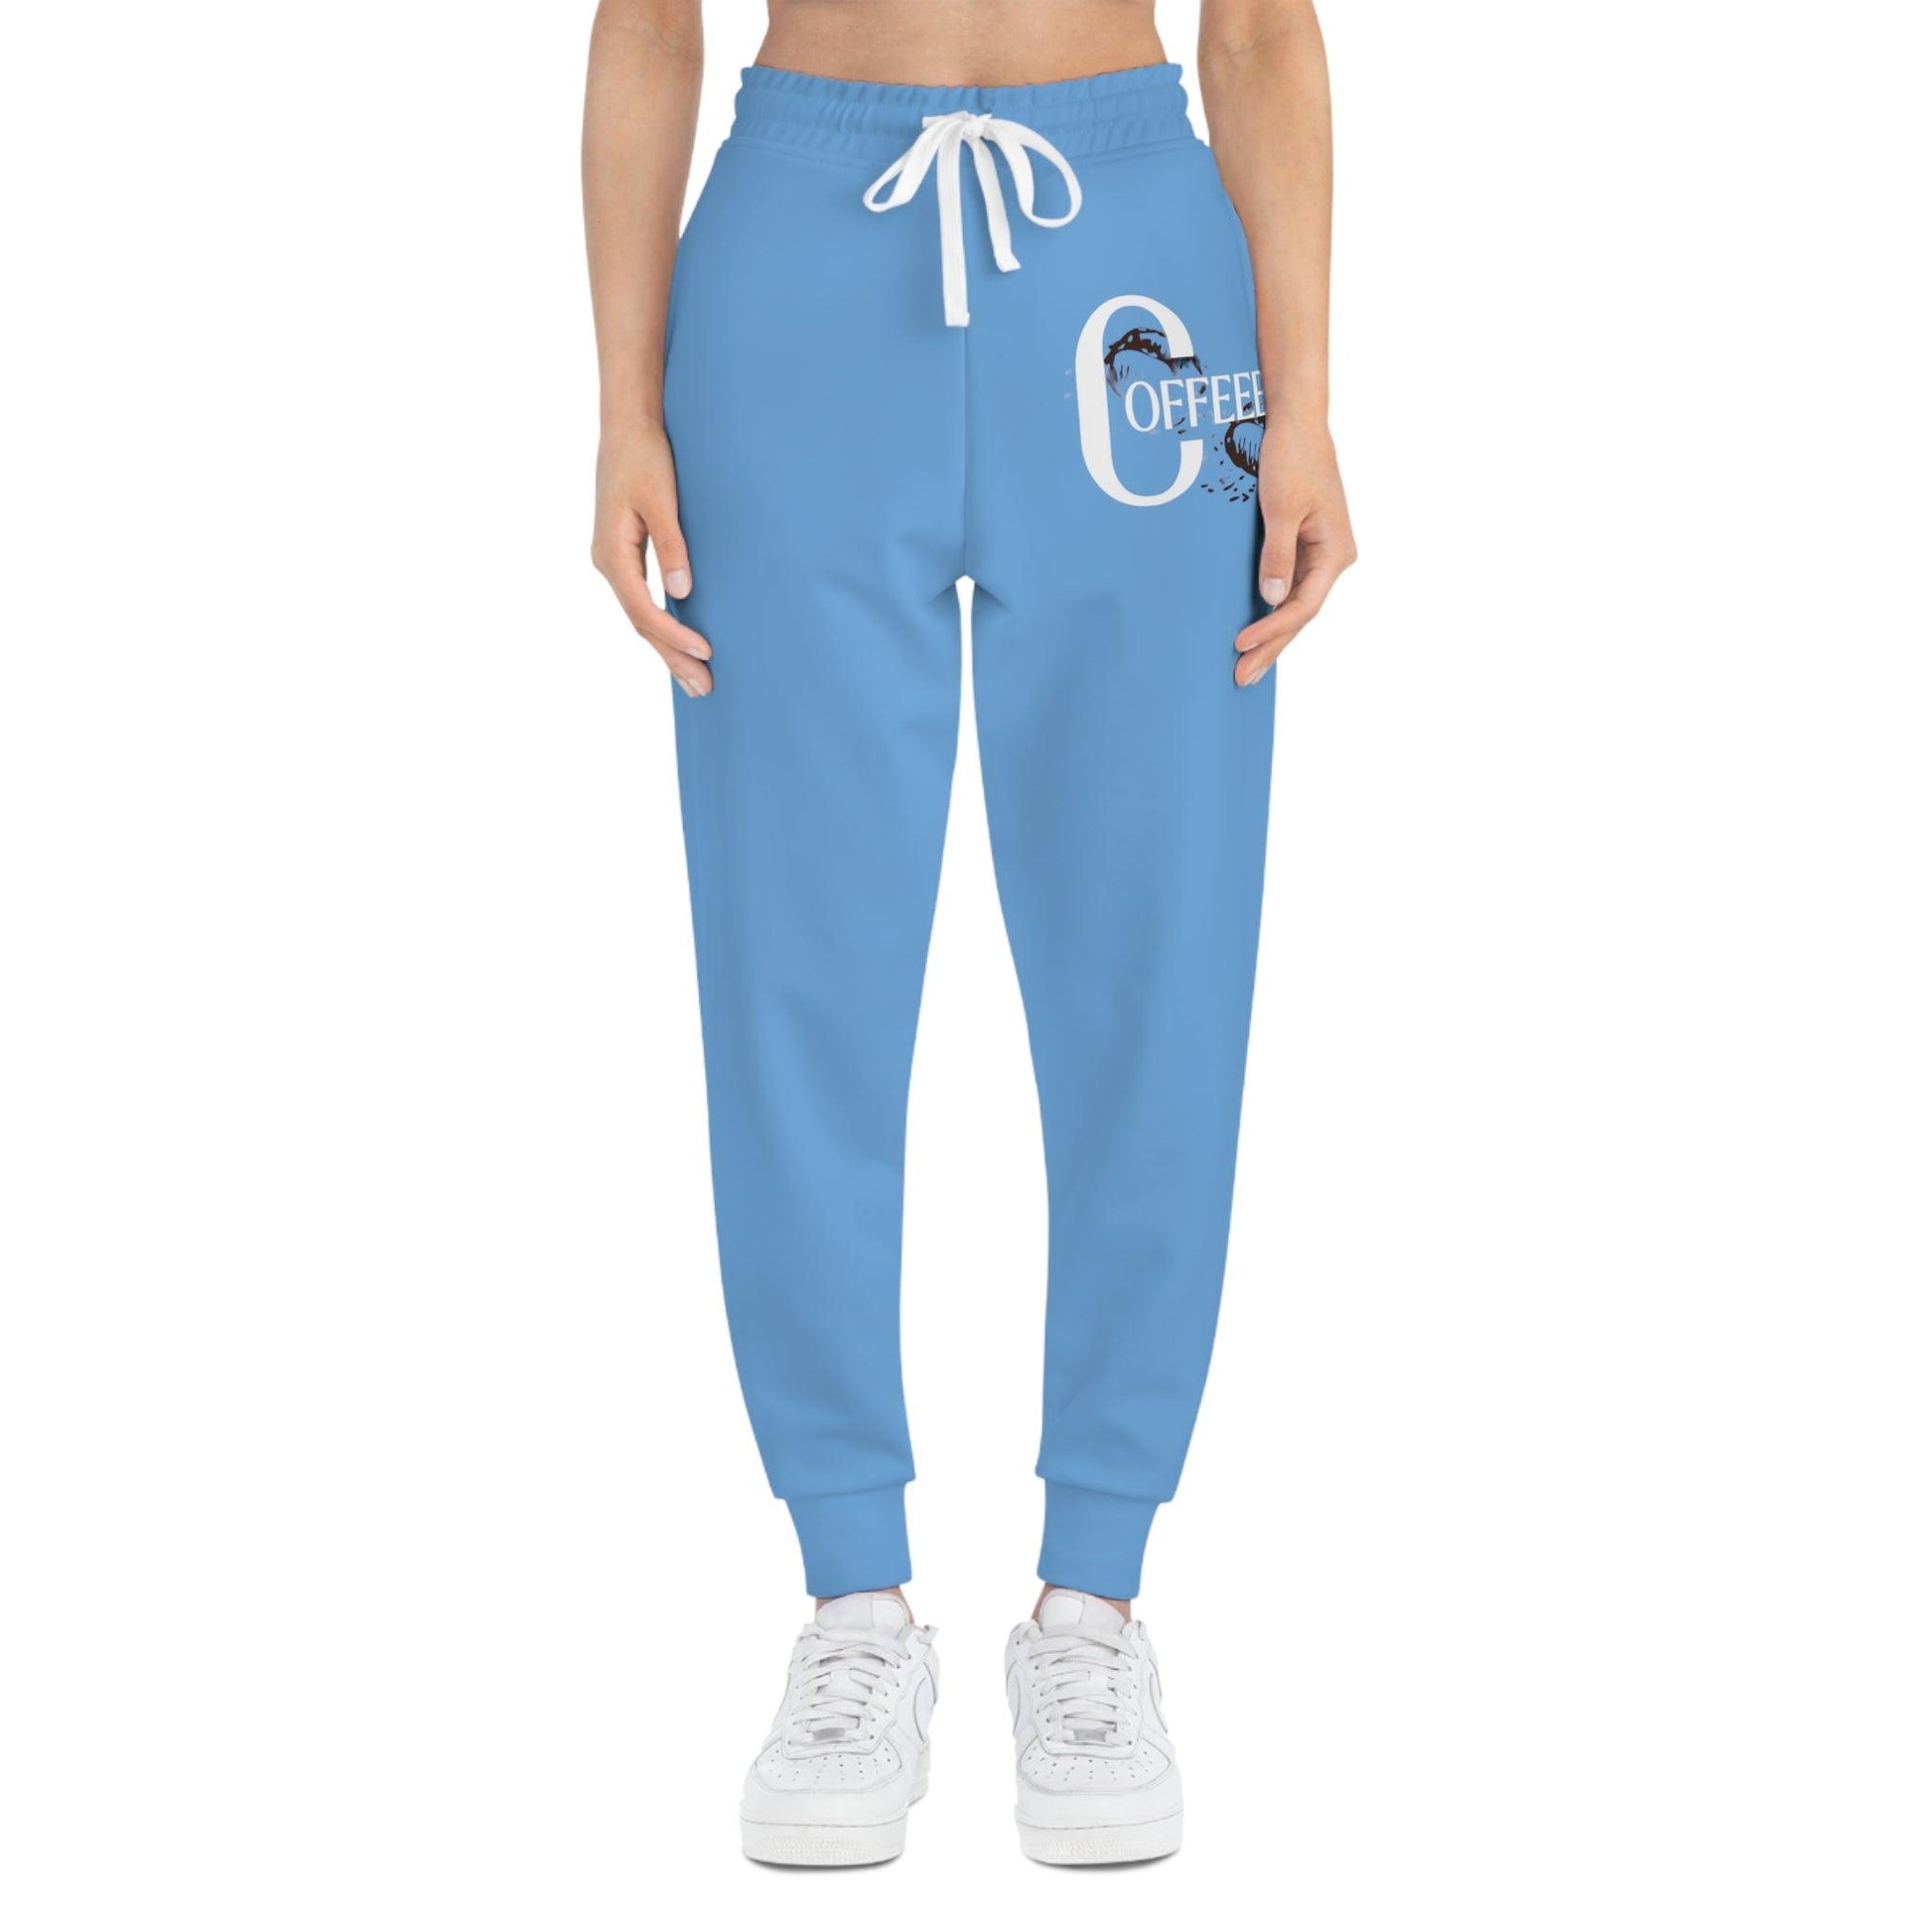 Light Blue Athletic Joggers - COFFEEBRE